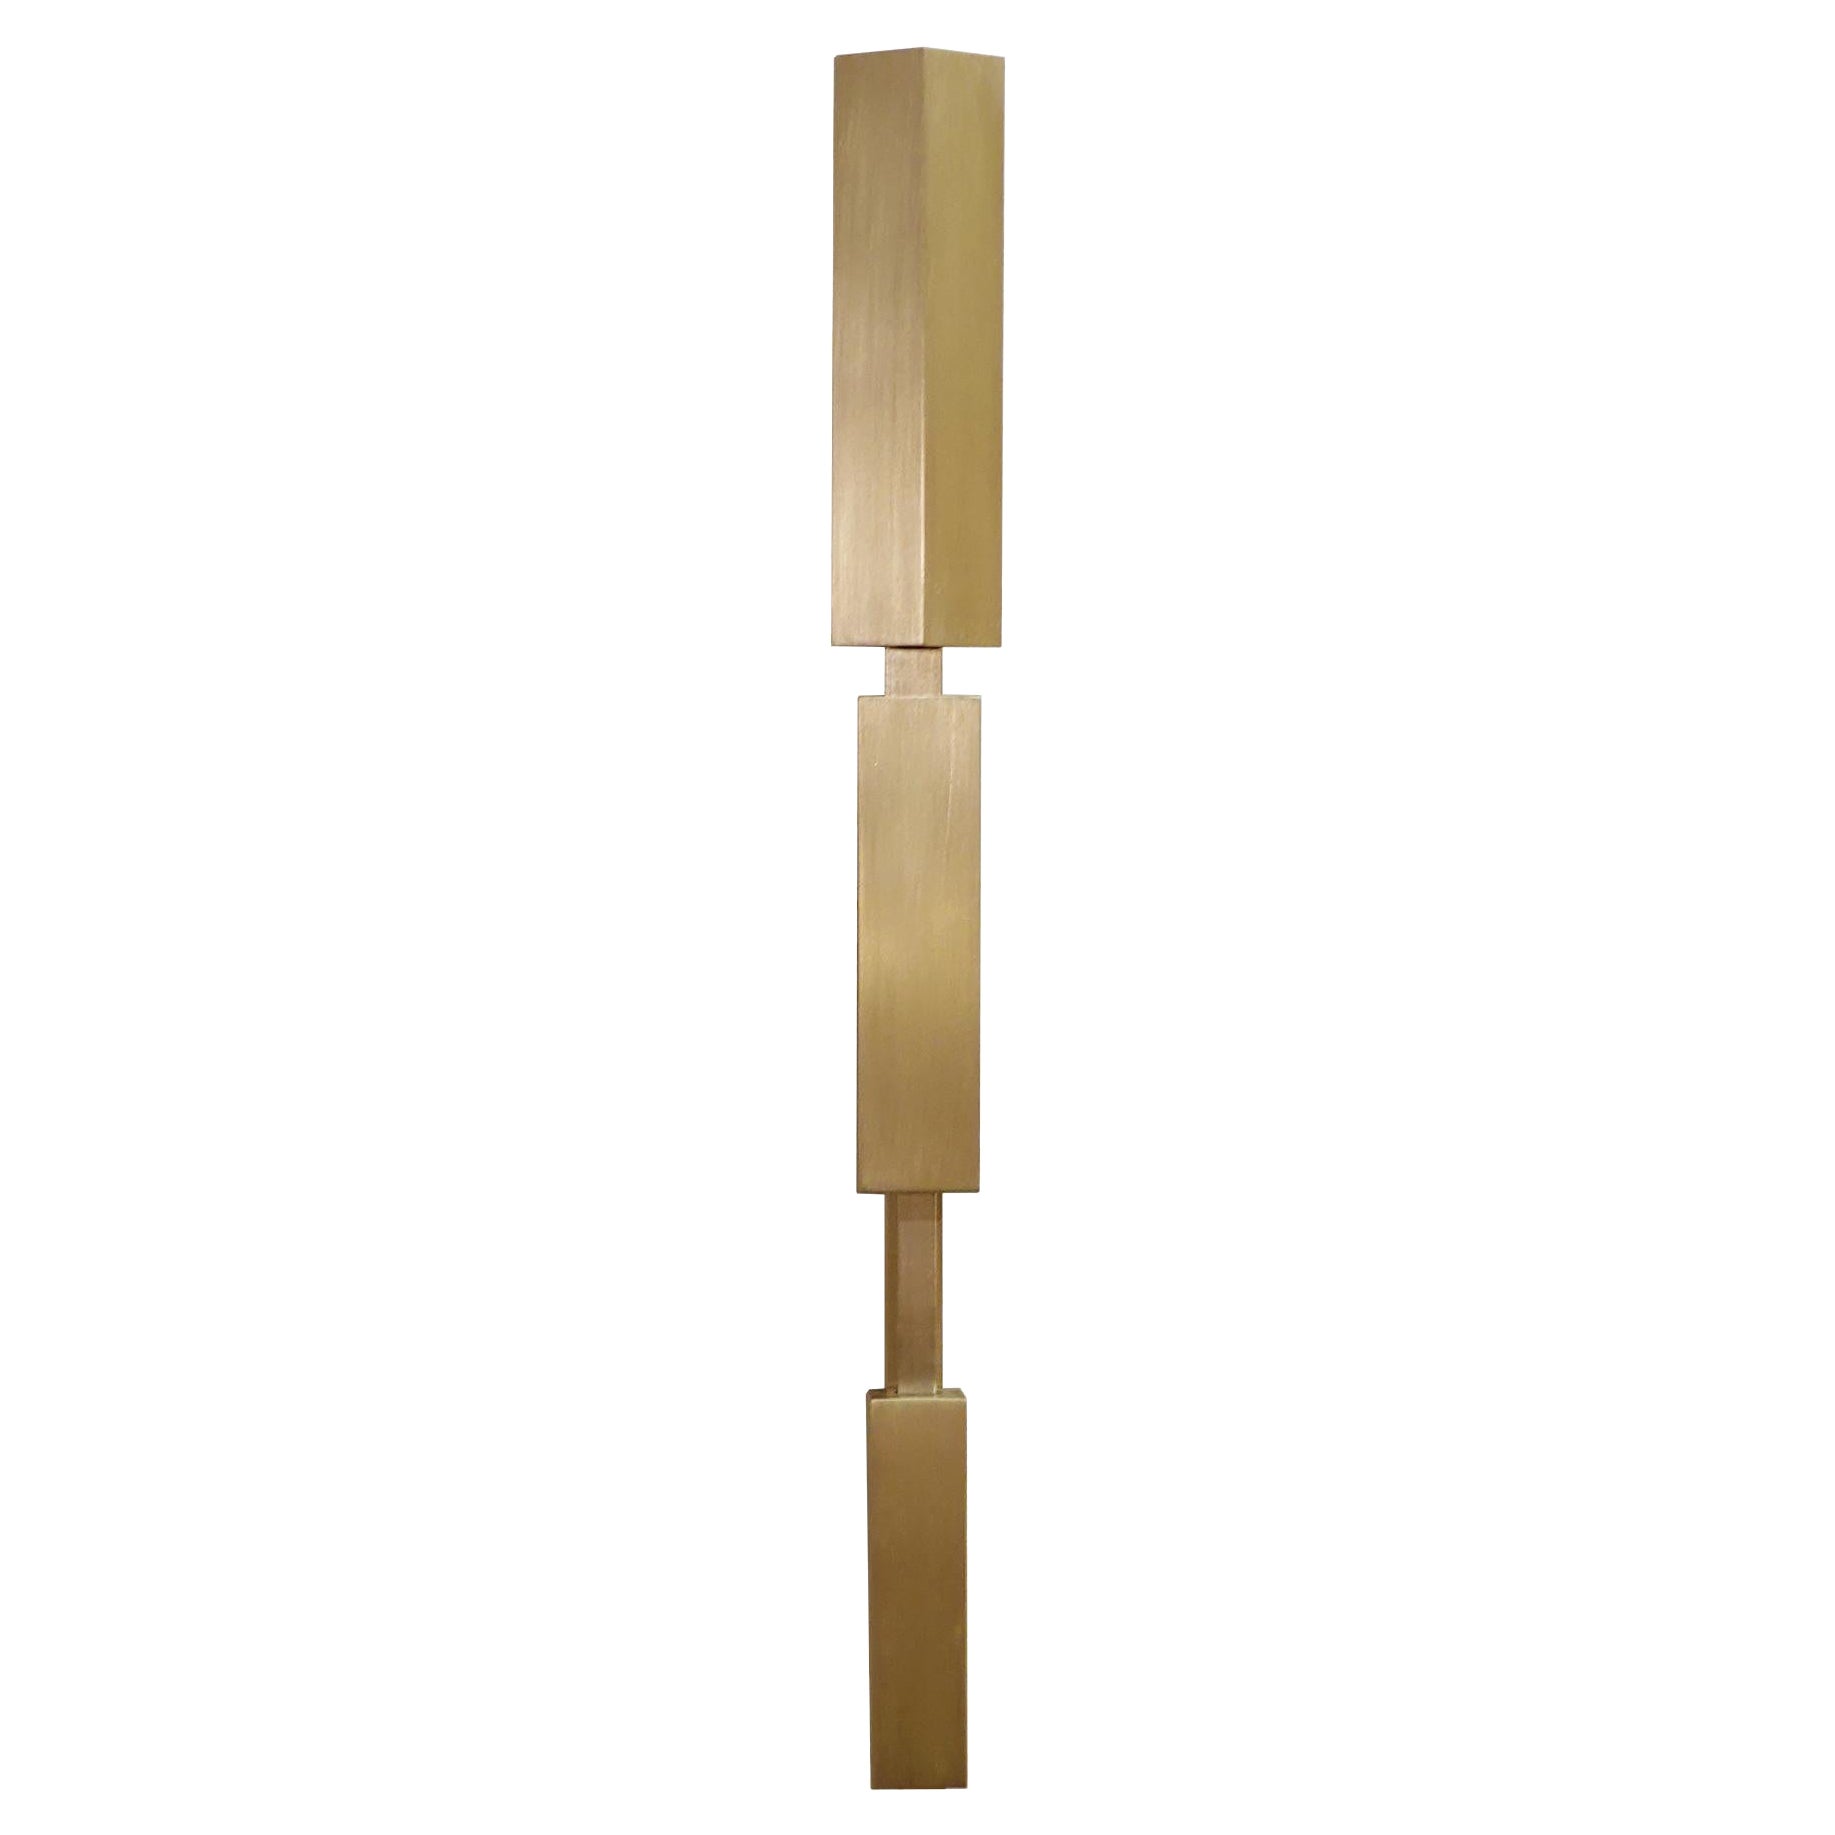 Tetra Interactive Wall Sconce Brass by Diaphan Studio, REP by Tuleste Factory For Sale